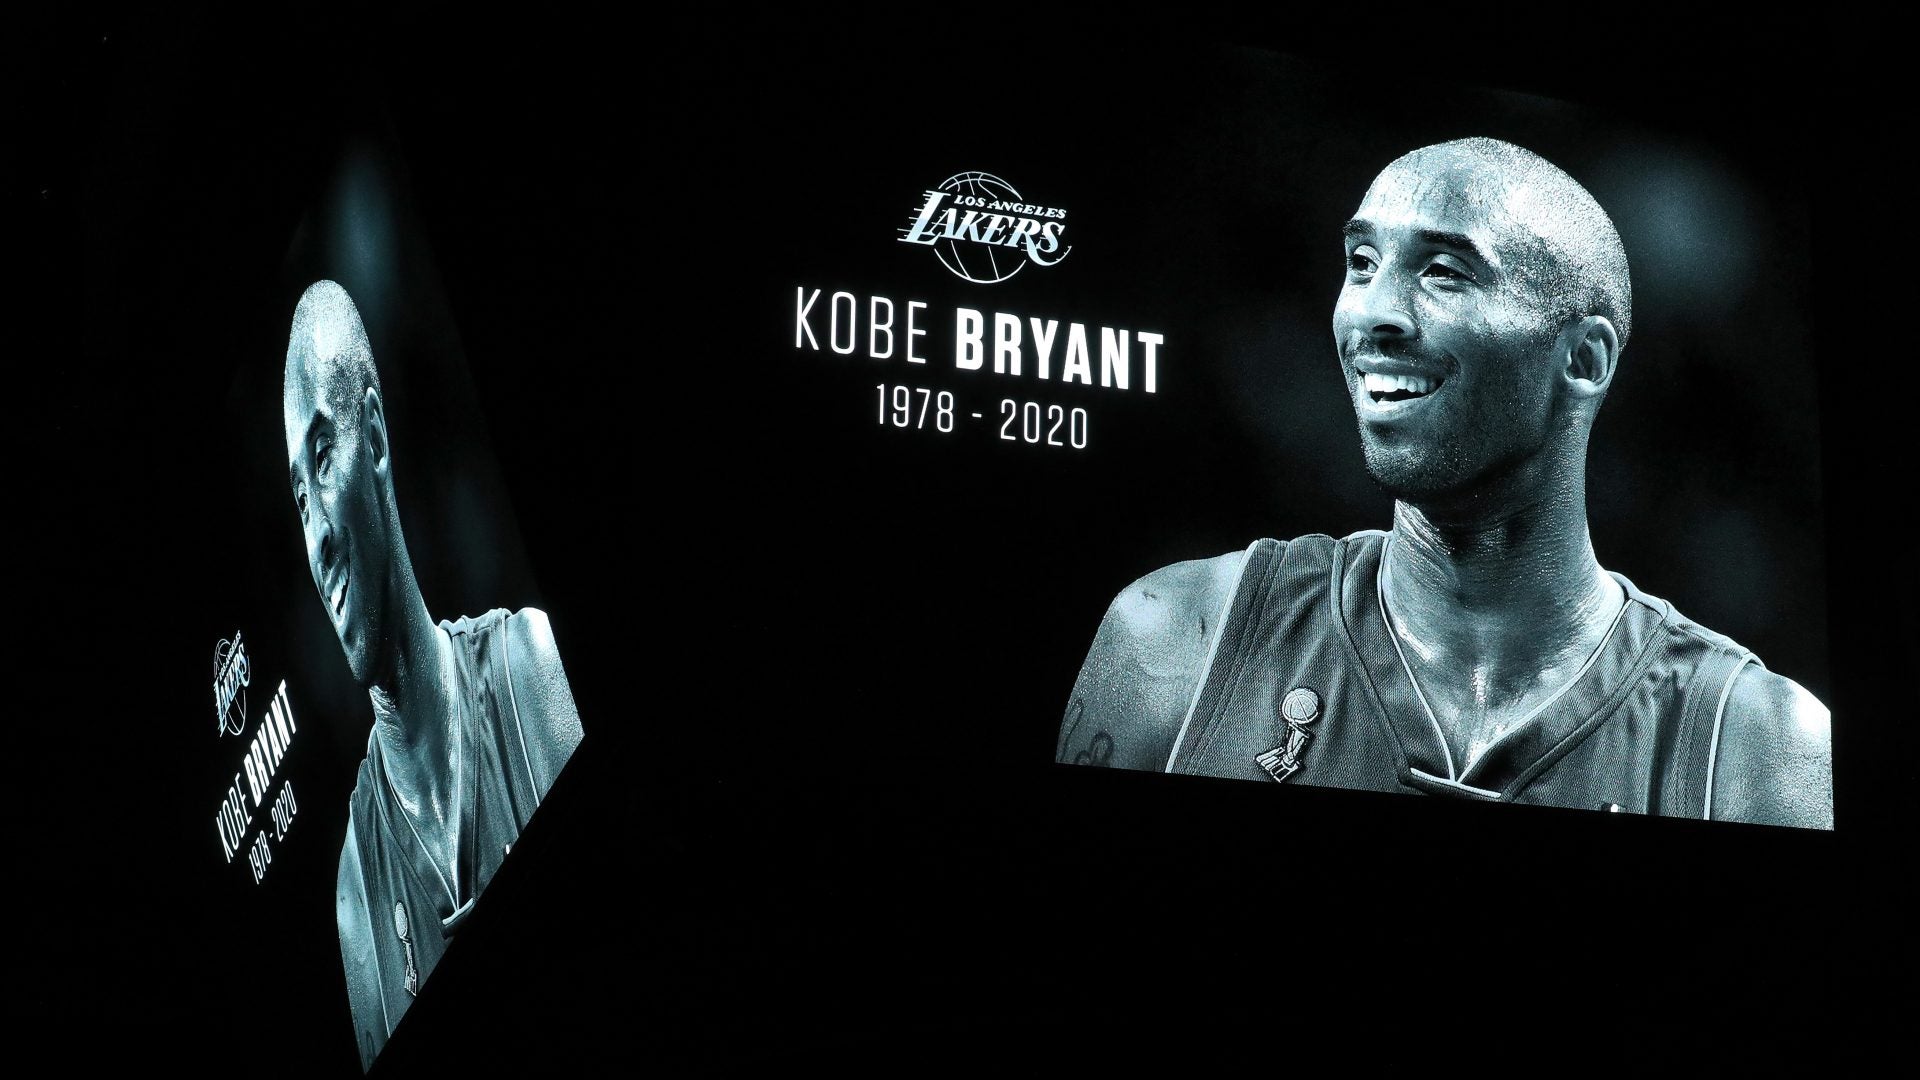 Over A Million Sign Petition To Make Kobe Bryant The New NBA Logo